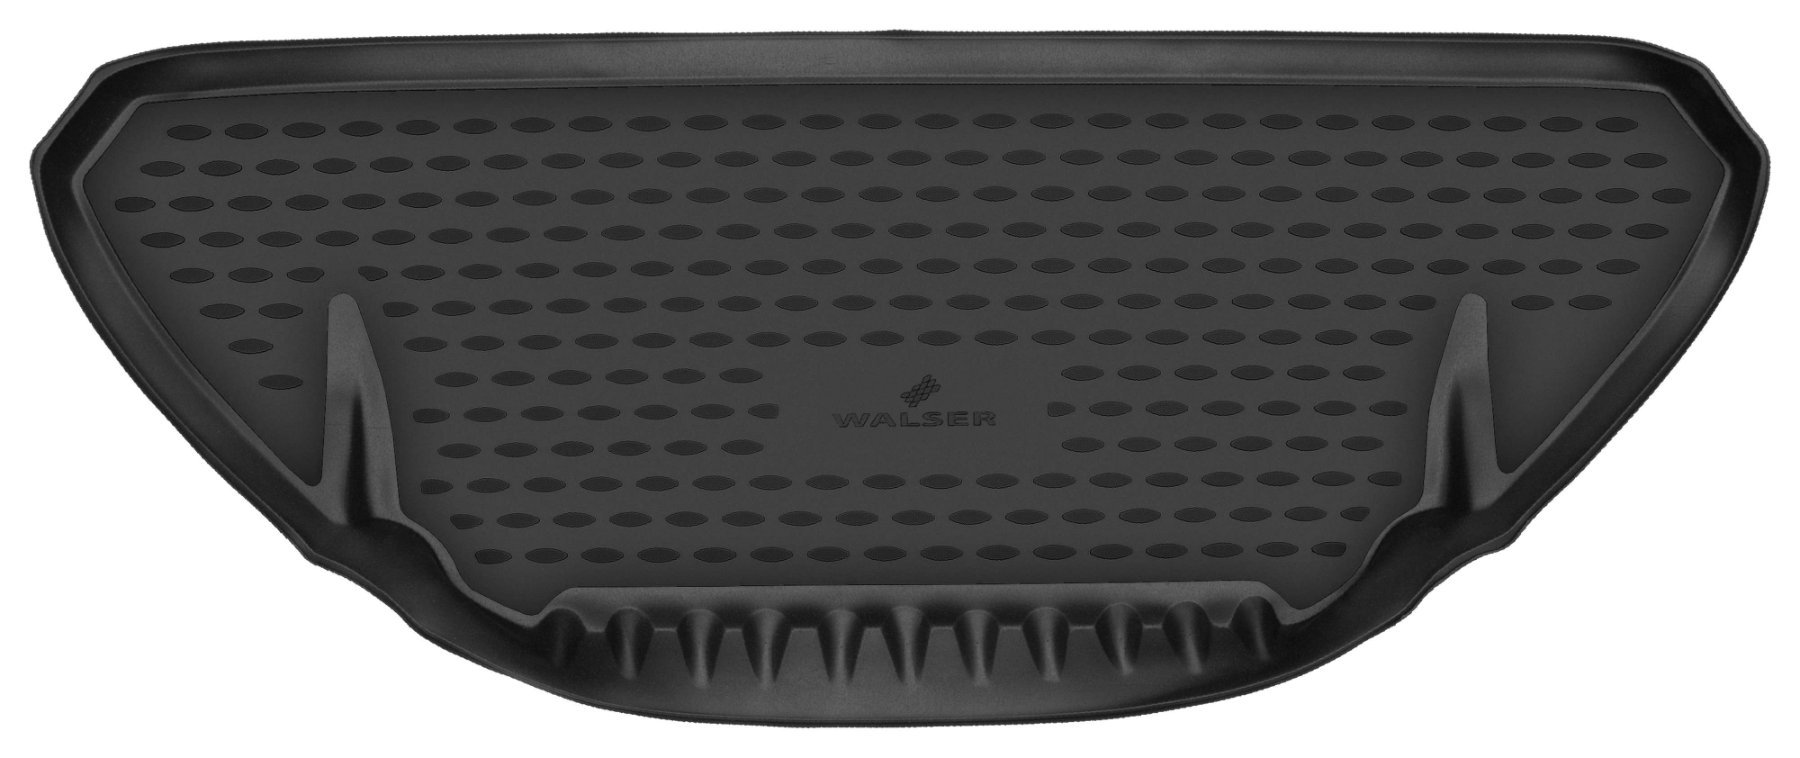 XTR Boot Mat for Tesla Model X (5YJX) 09/2013-Today, front luggage compartment